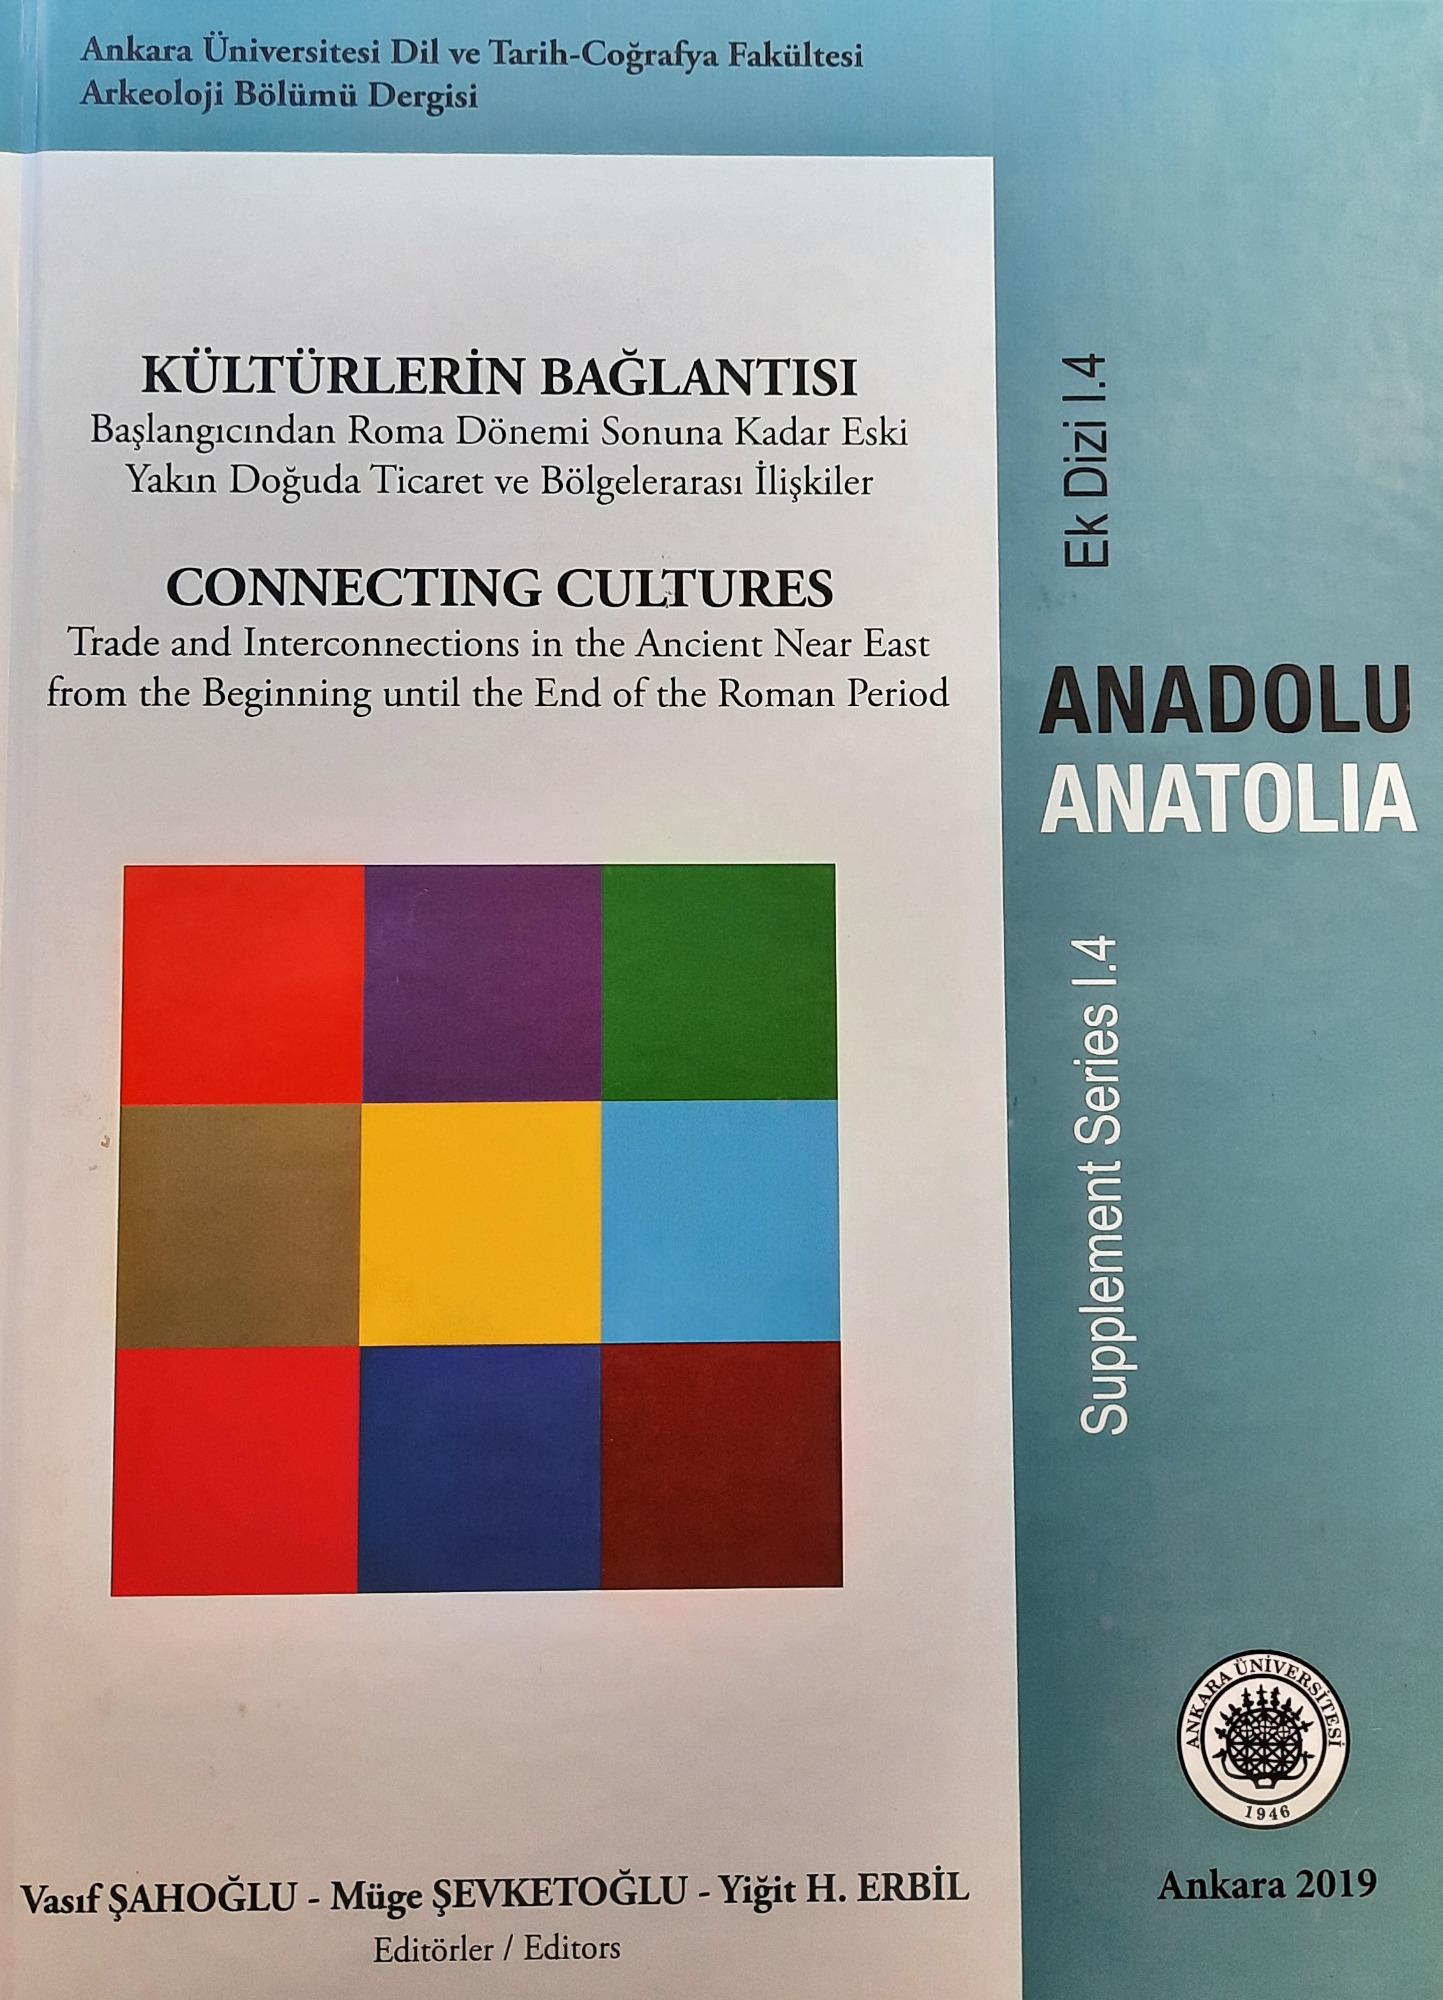 Erbil, Yiğit H. – Müge Şevketoğlu – Vasıf Şahoğlu : Connecting cultures : trade and interconnections in the Near East from the beginning until the end of the Roman period.